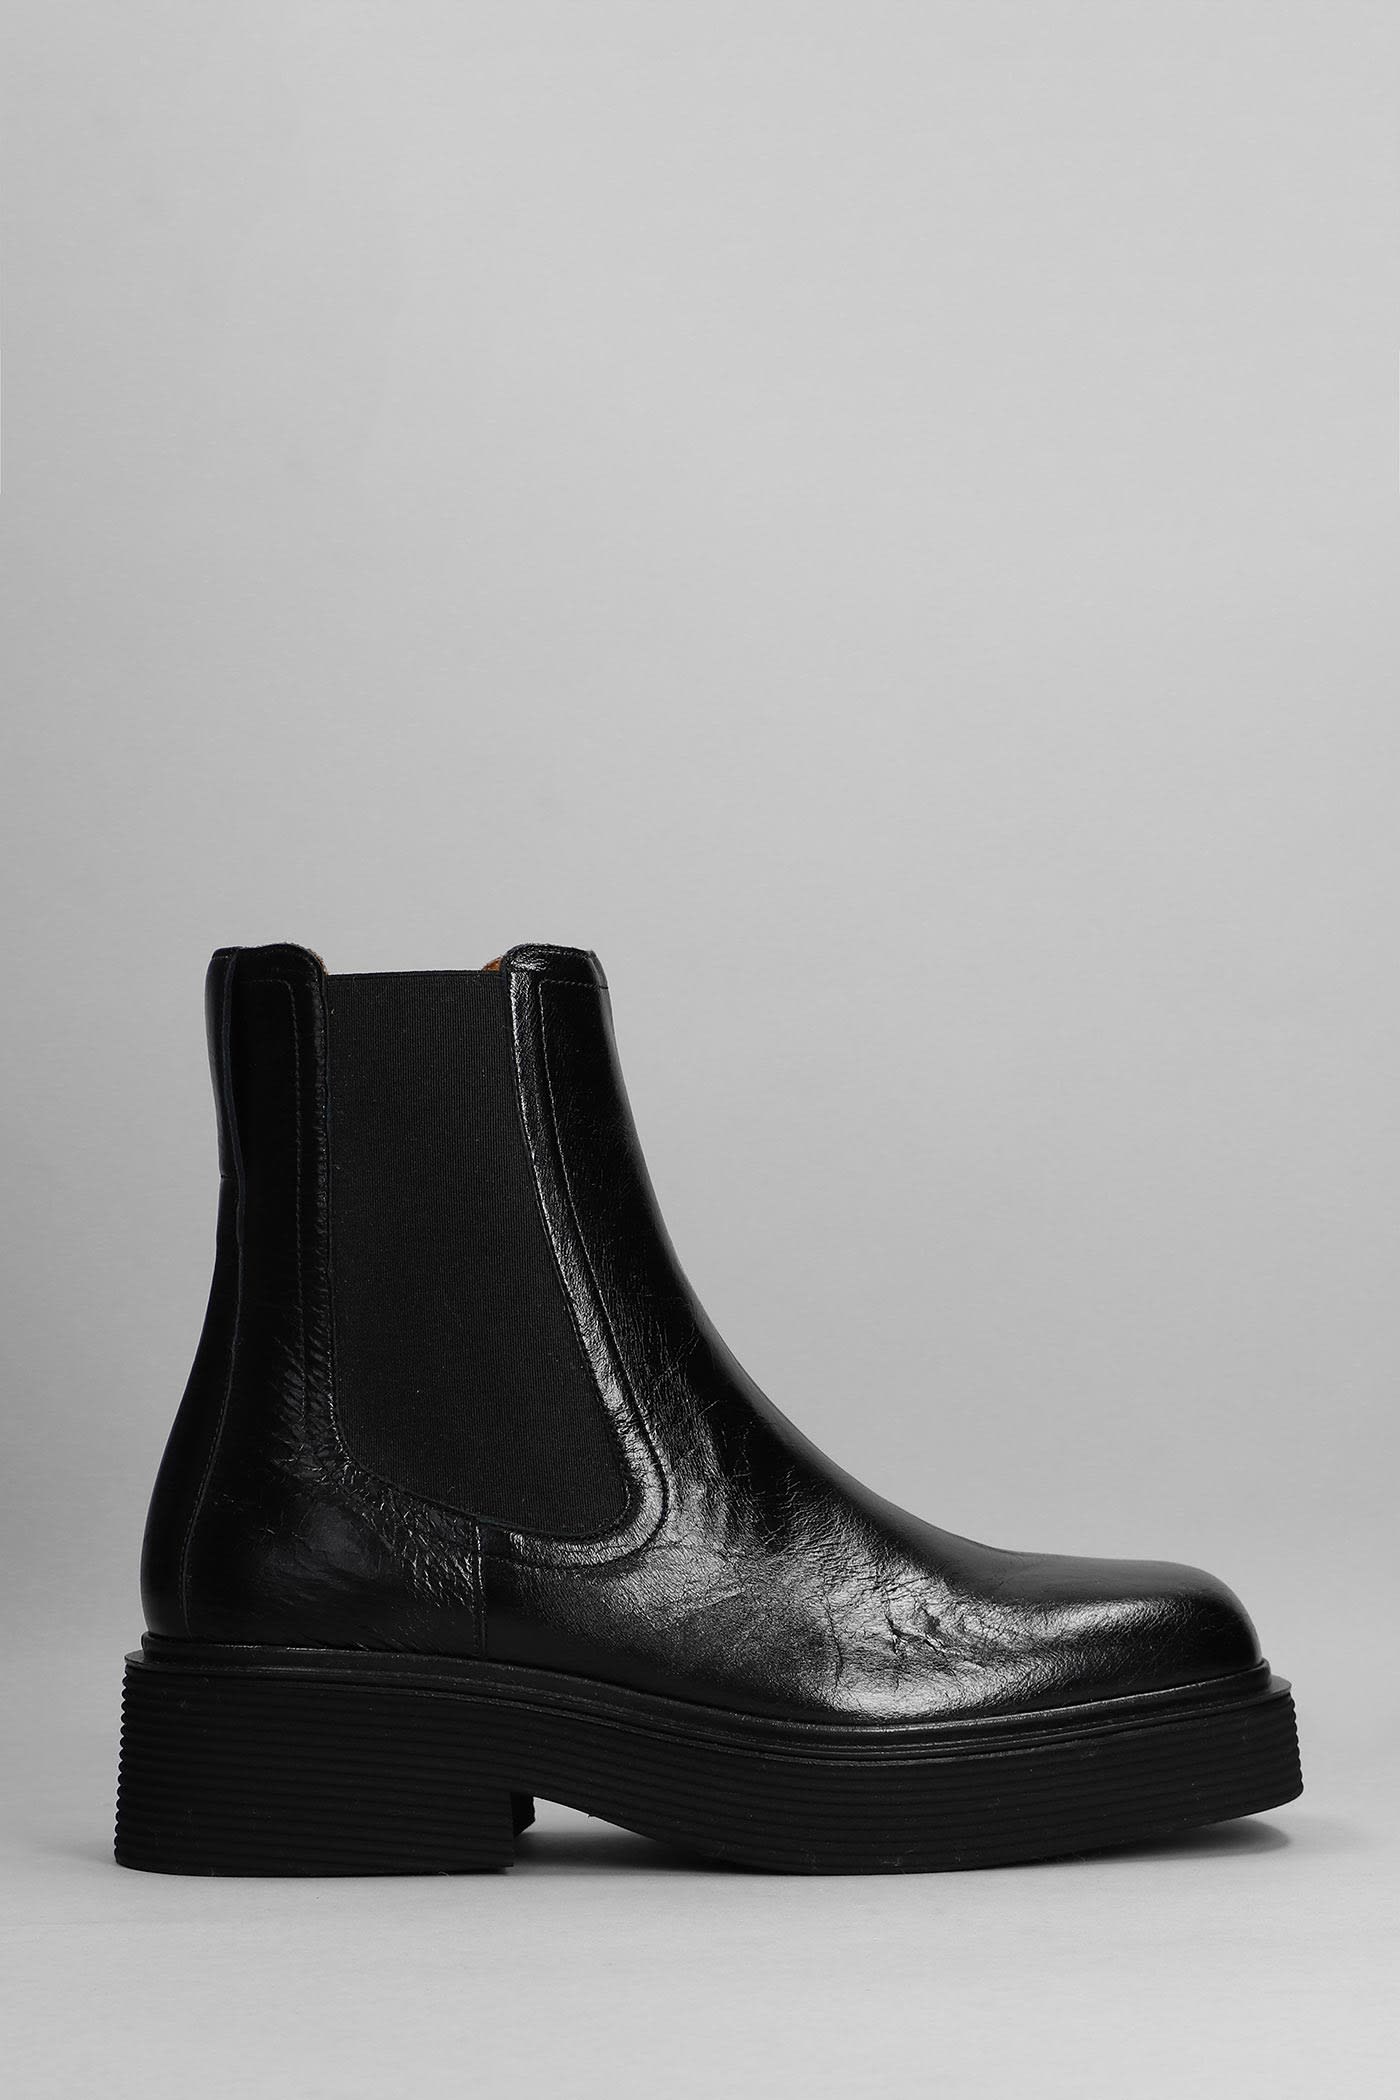 Marni Ankle Boots In Black Leather